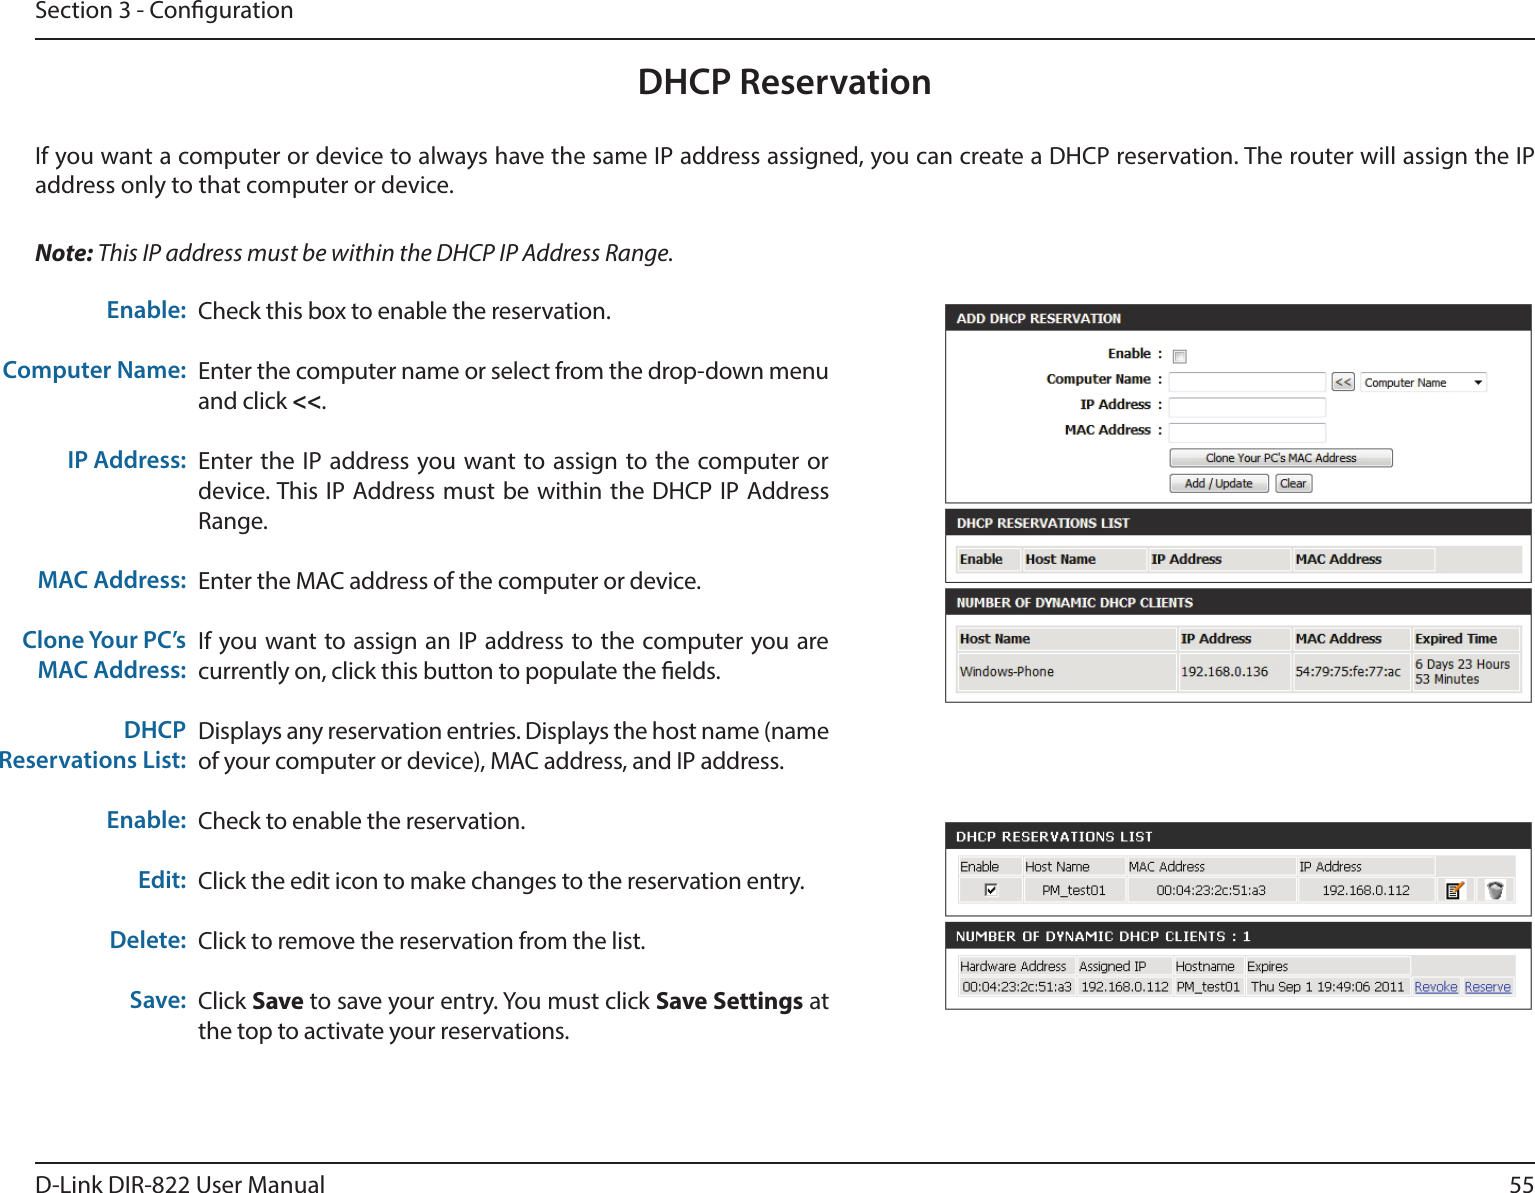 55D-Link DIR-822 User ManualSection 3 - CongurationDHCP ReservationIf you want a computer or device to always have the same IP address assigned, you can create a DHCP reservation. The router will assign the IP address only to that computer or device. Note: This IP address must be within the DHCP IP Address Range.Check this box to enable the reservation.Enter the computer name or select from the drop-down menu and click &lt;&lt;.Enter the IP address you want to assign to the computer or device. This IP Address must be within the DHCP IP Address Range.Enter the MAC address of the computer or device.If you want to assign an IP address to the computer you are currently on, click this button to populate the elds. Displays any reservation entries. Displays the host name (name of your computer or device), MAC address, and IP address.Check to enable the reservation.Click the edit icon to make changes to the reservation entry.Click to remove the reservation from the list.Click Save to save your entry. You must click Save Settings at the top to activate your reservations. Enable:Computer Name:IP Address:MAC Address:Clone Your PC’s MAC Address:DHCP Reservations List:Enable:Edit:Delete:Save: